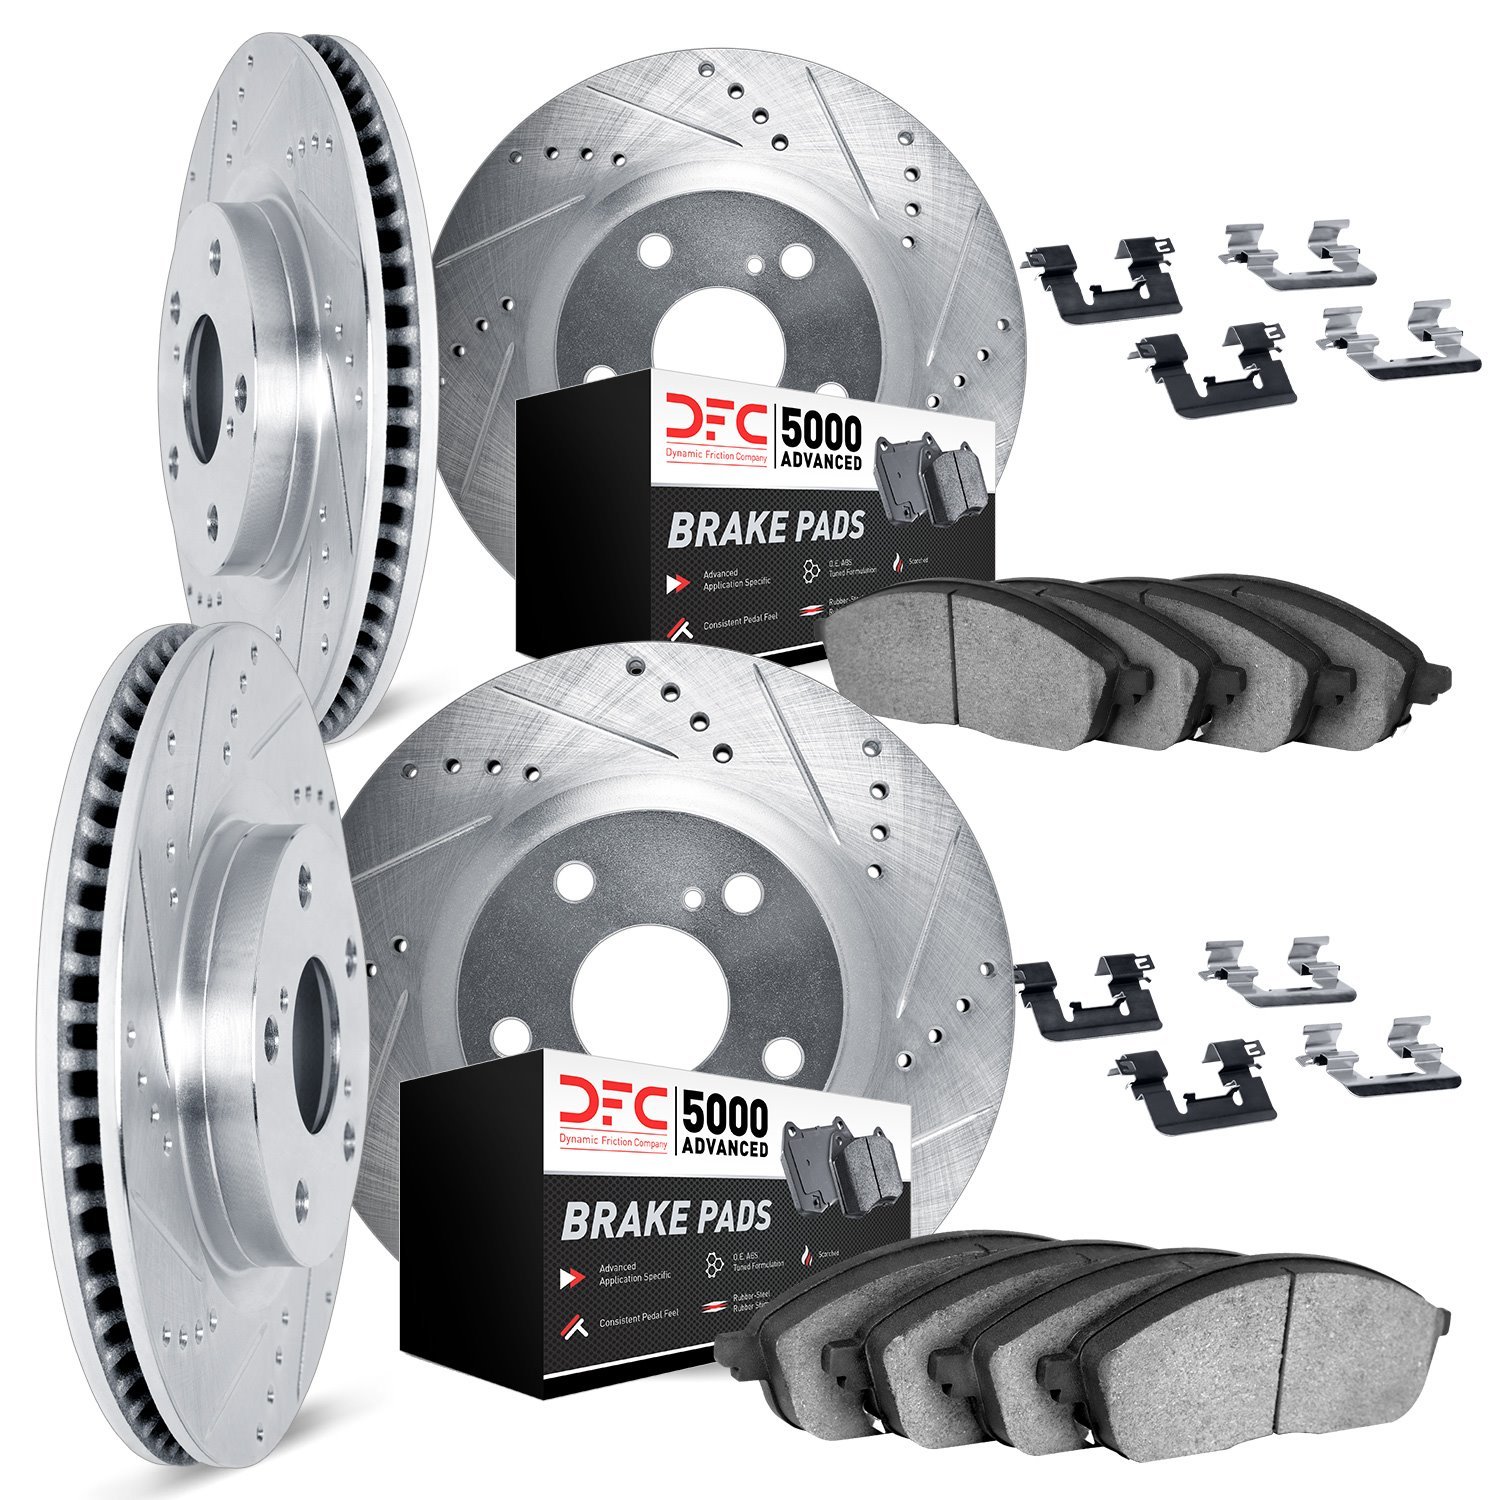 7514-31009 Drilled/Slotted Brake Rotors w/5000 Advanced Brake Pads Kit & Hardware [Silver], 2004-2007 BMW, Position: Front and R